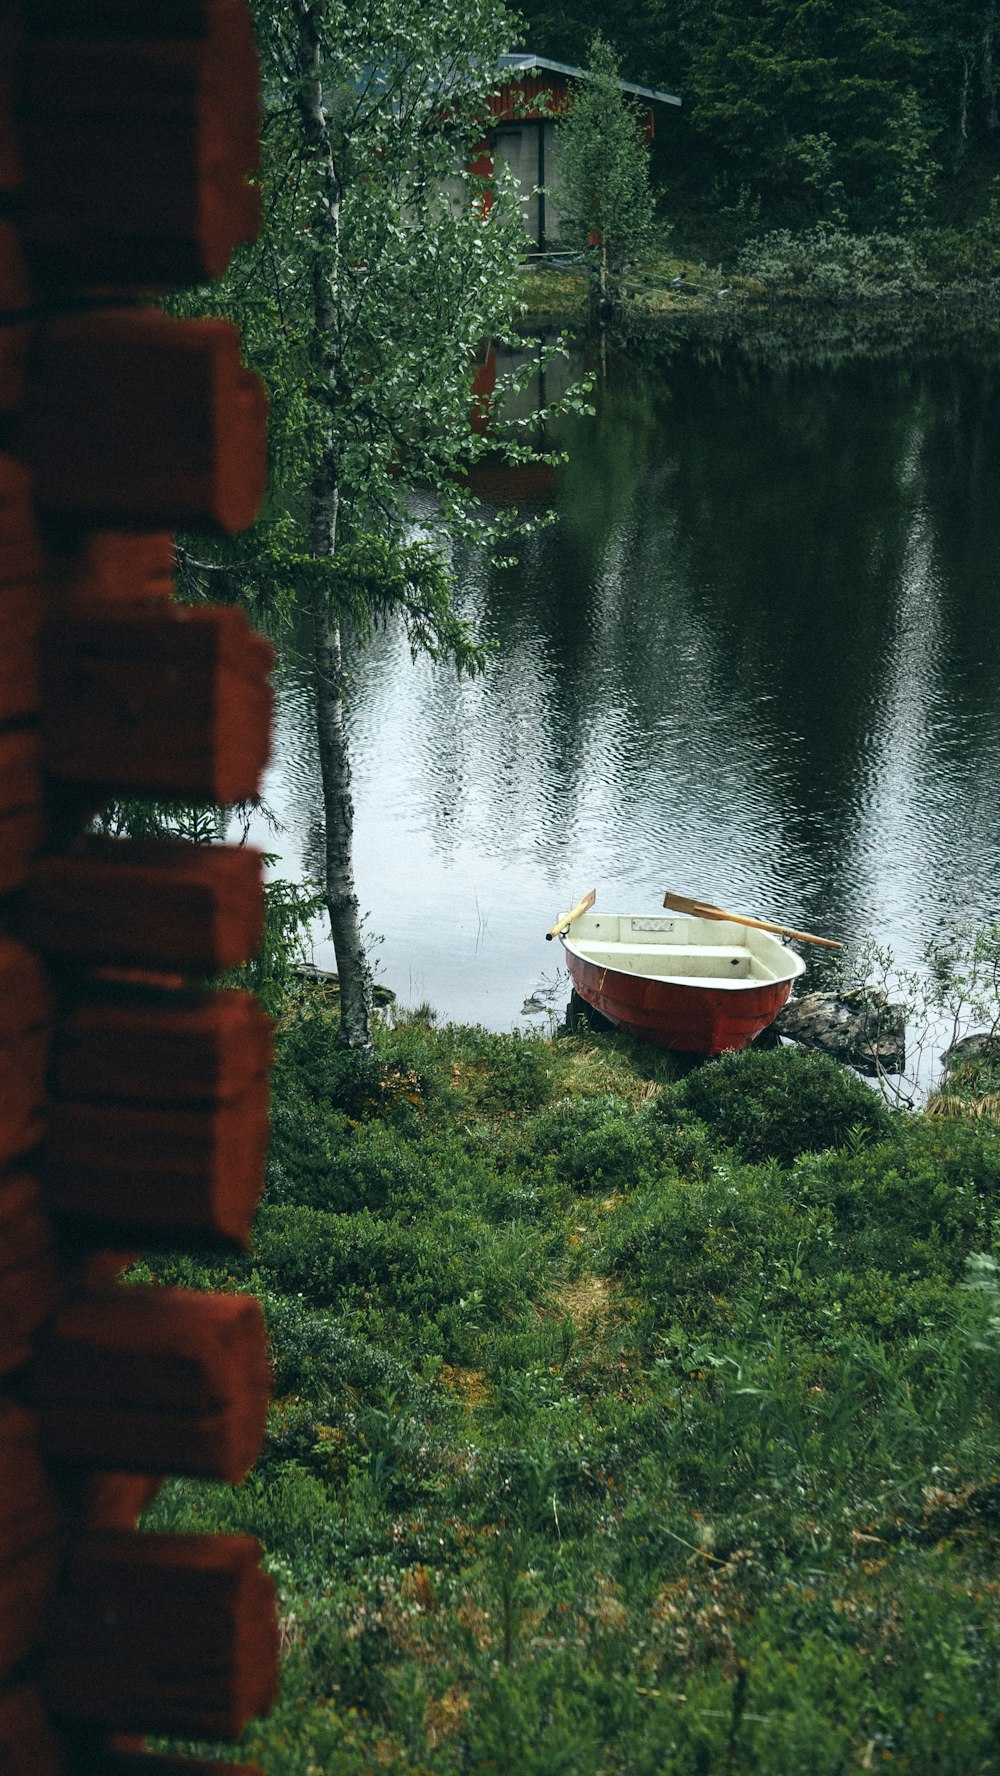 white and red boat on lake